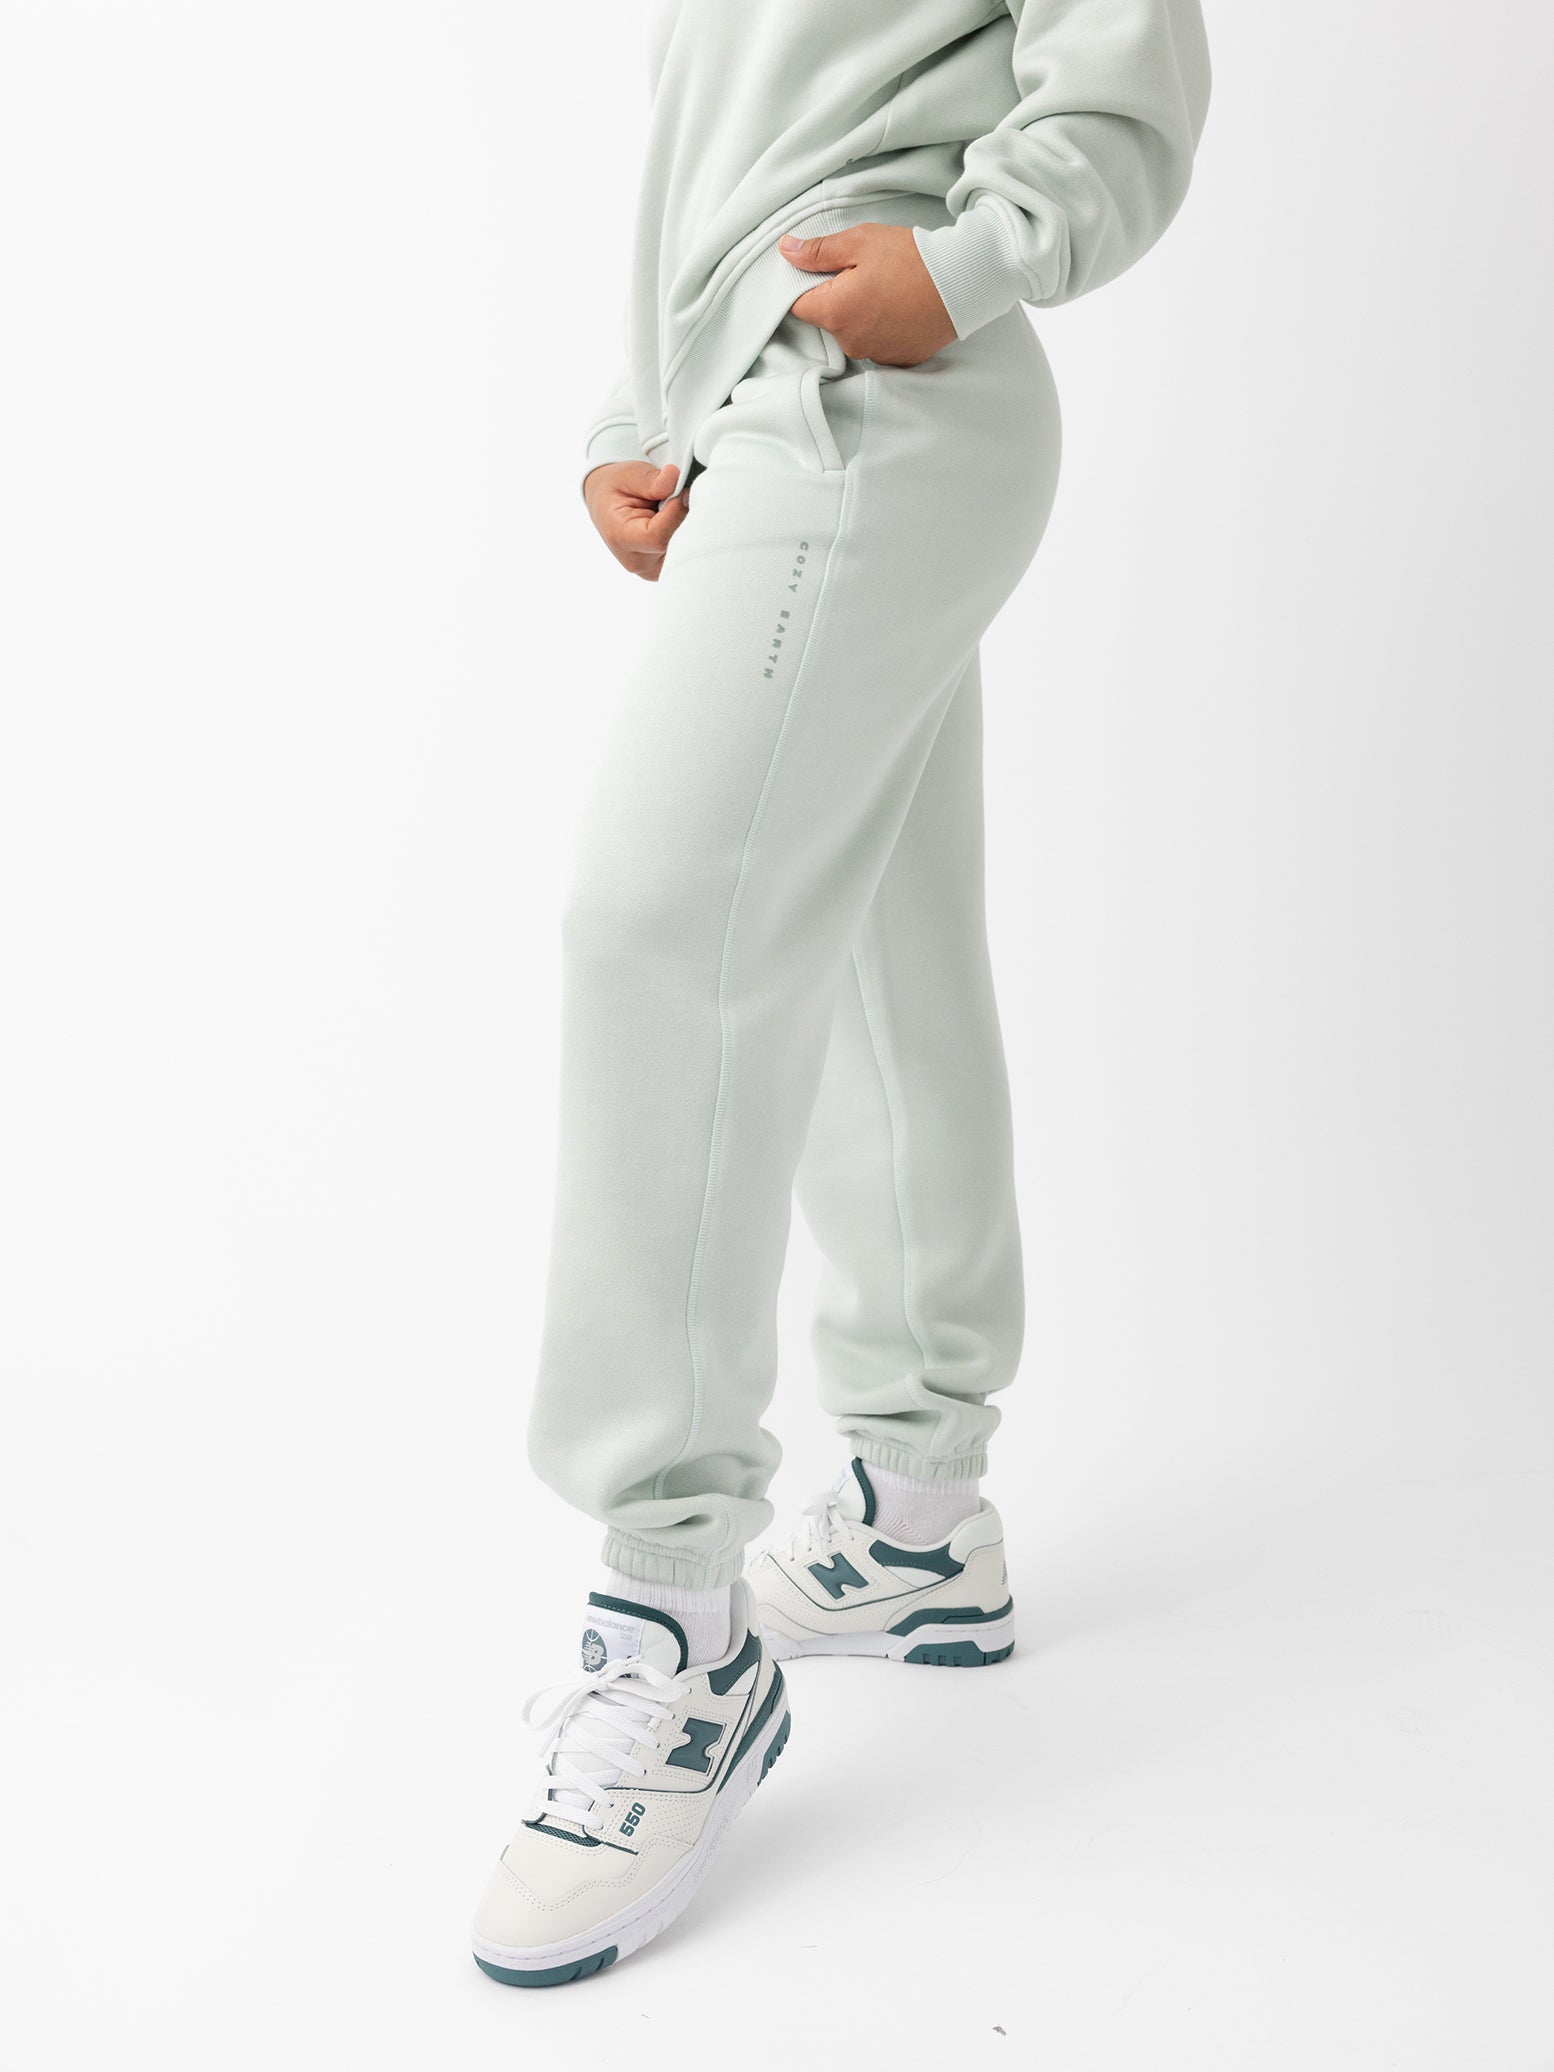 Arctic CityScape Joggers. The Joggers are being worn by a female model. The photo is taken with the models hand by the pocket of the joggers. The back ground is a crisp white background. 